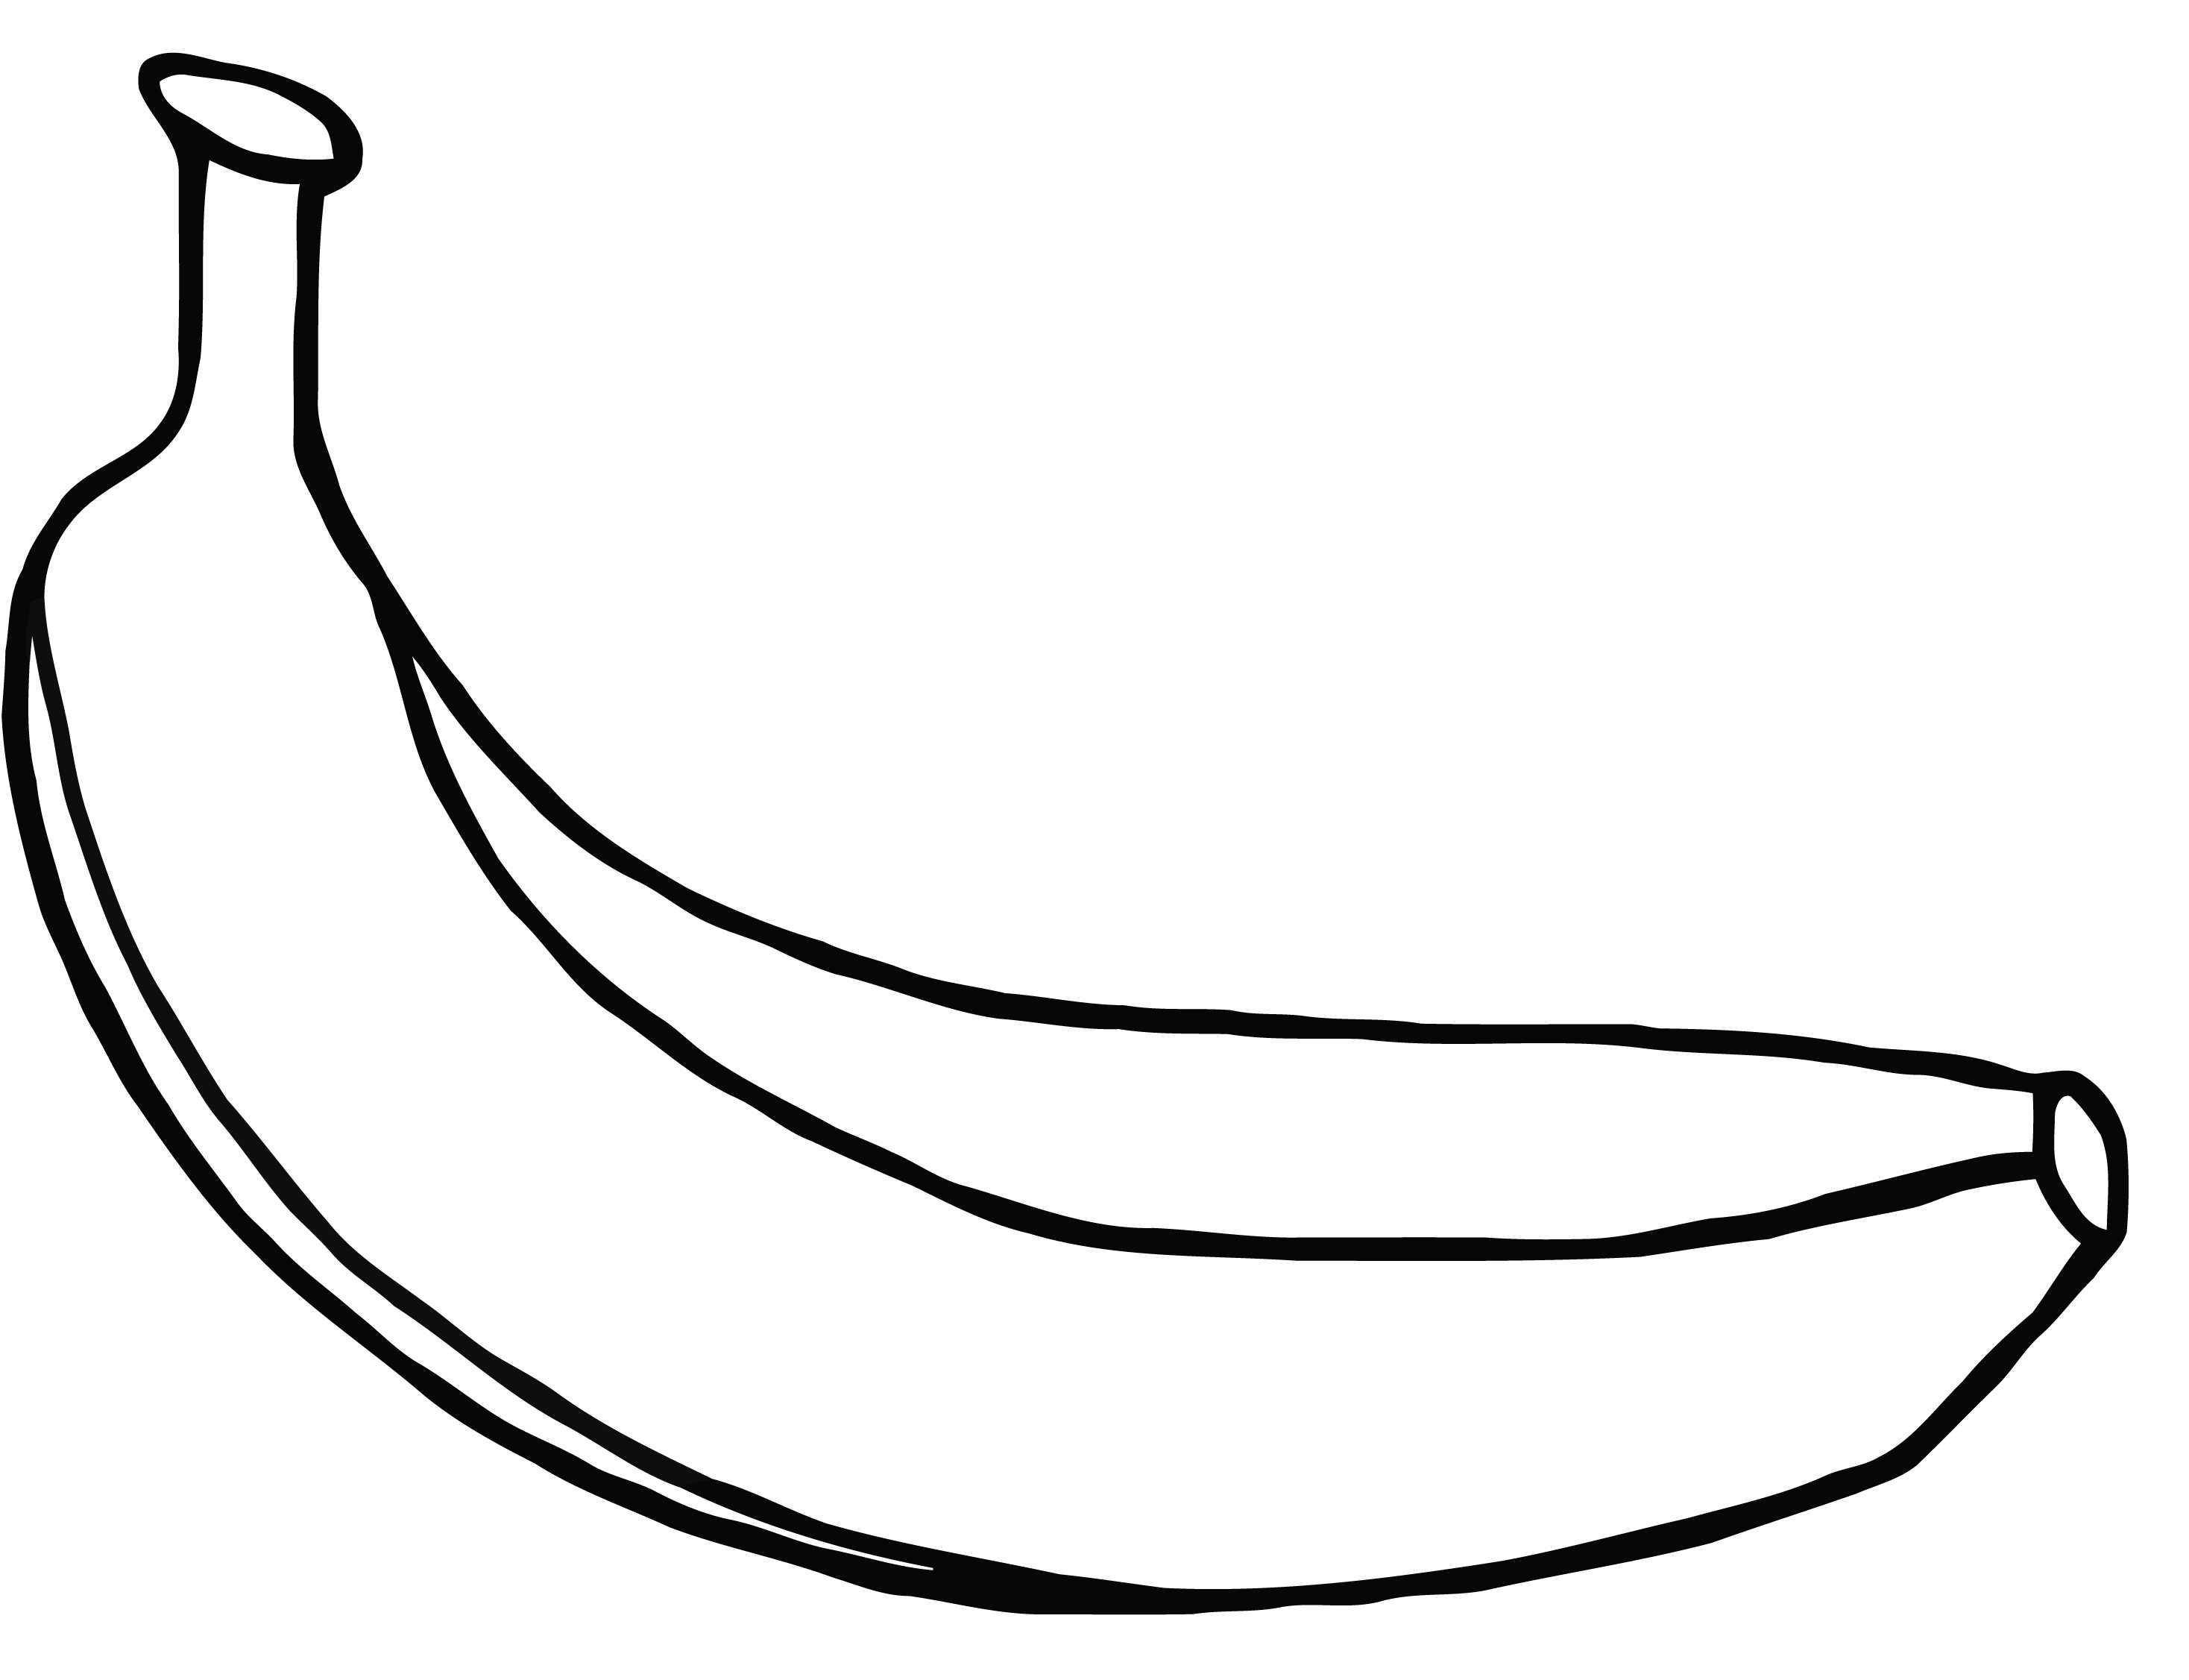 Free Banana Black And White Clipart, Download Free Clip Art